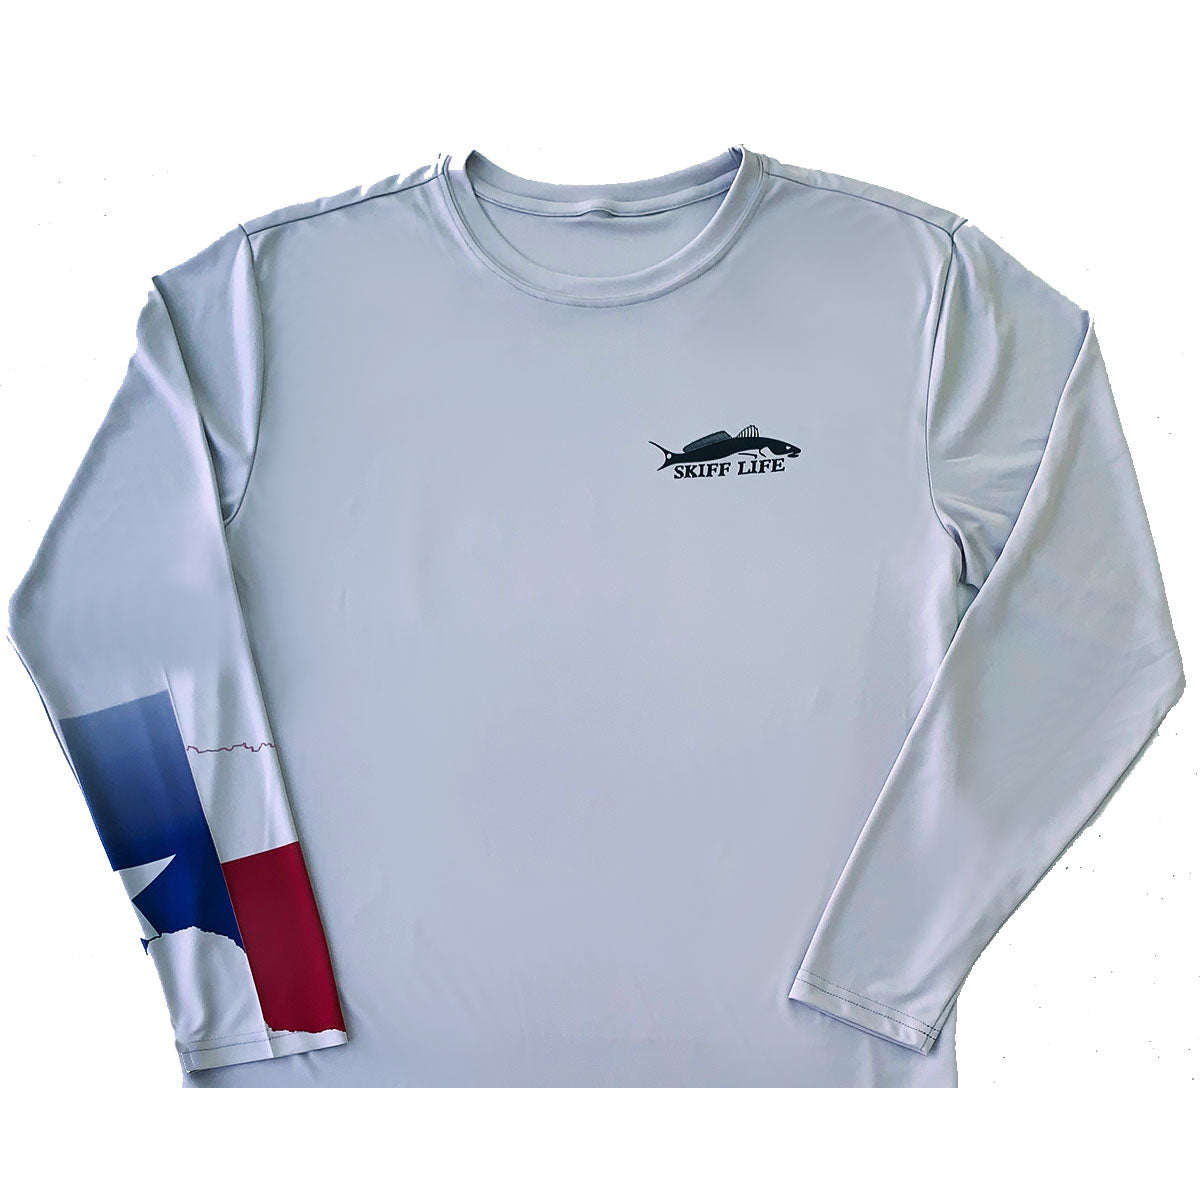 Youth/Kids Texas Redfish Fishing Shirt with Flag Sleeve Extra Small / Ice Blue